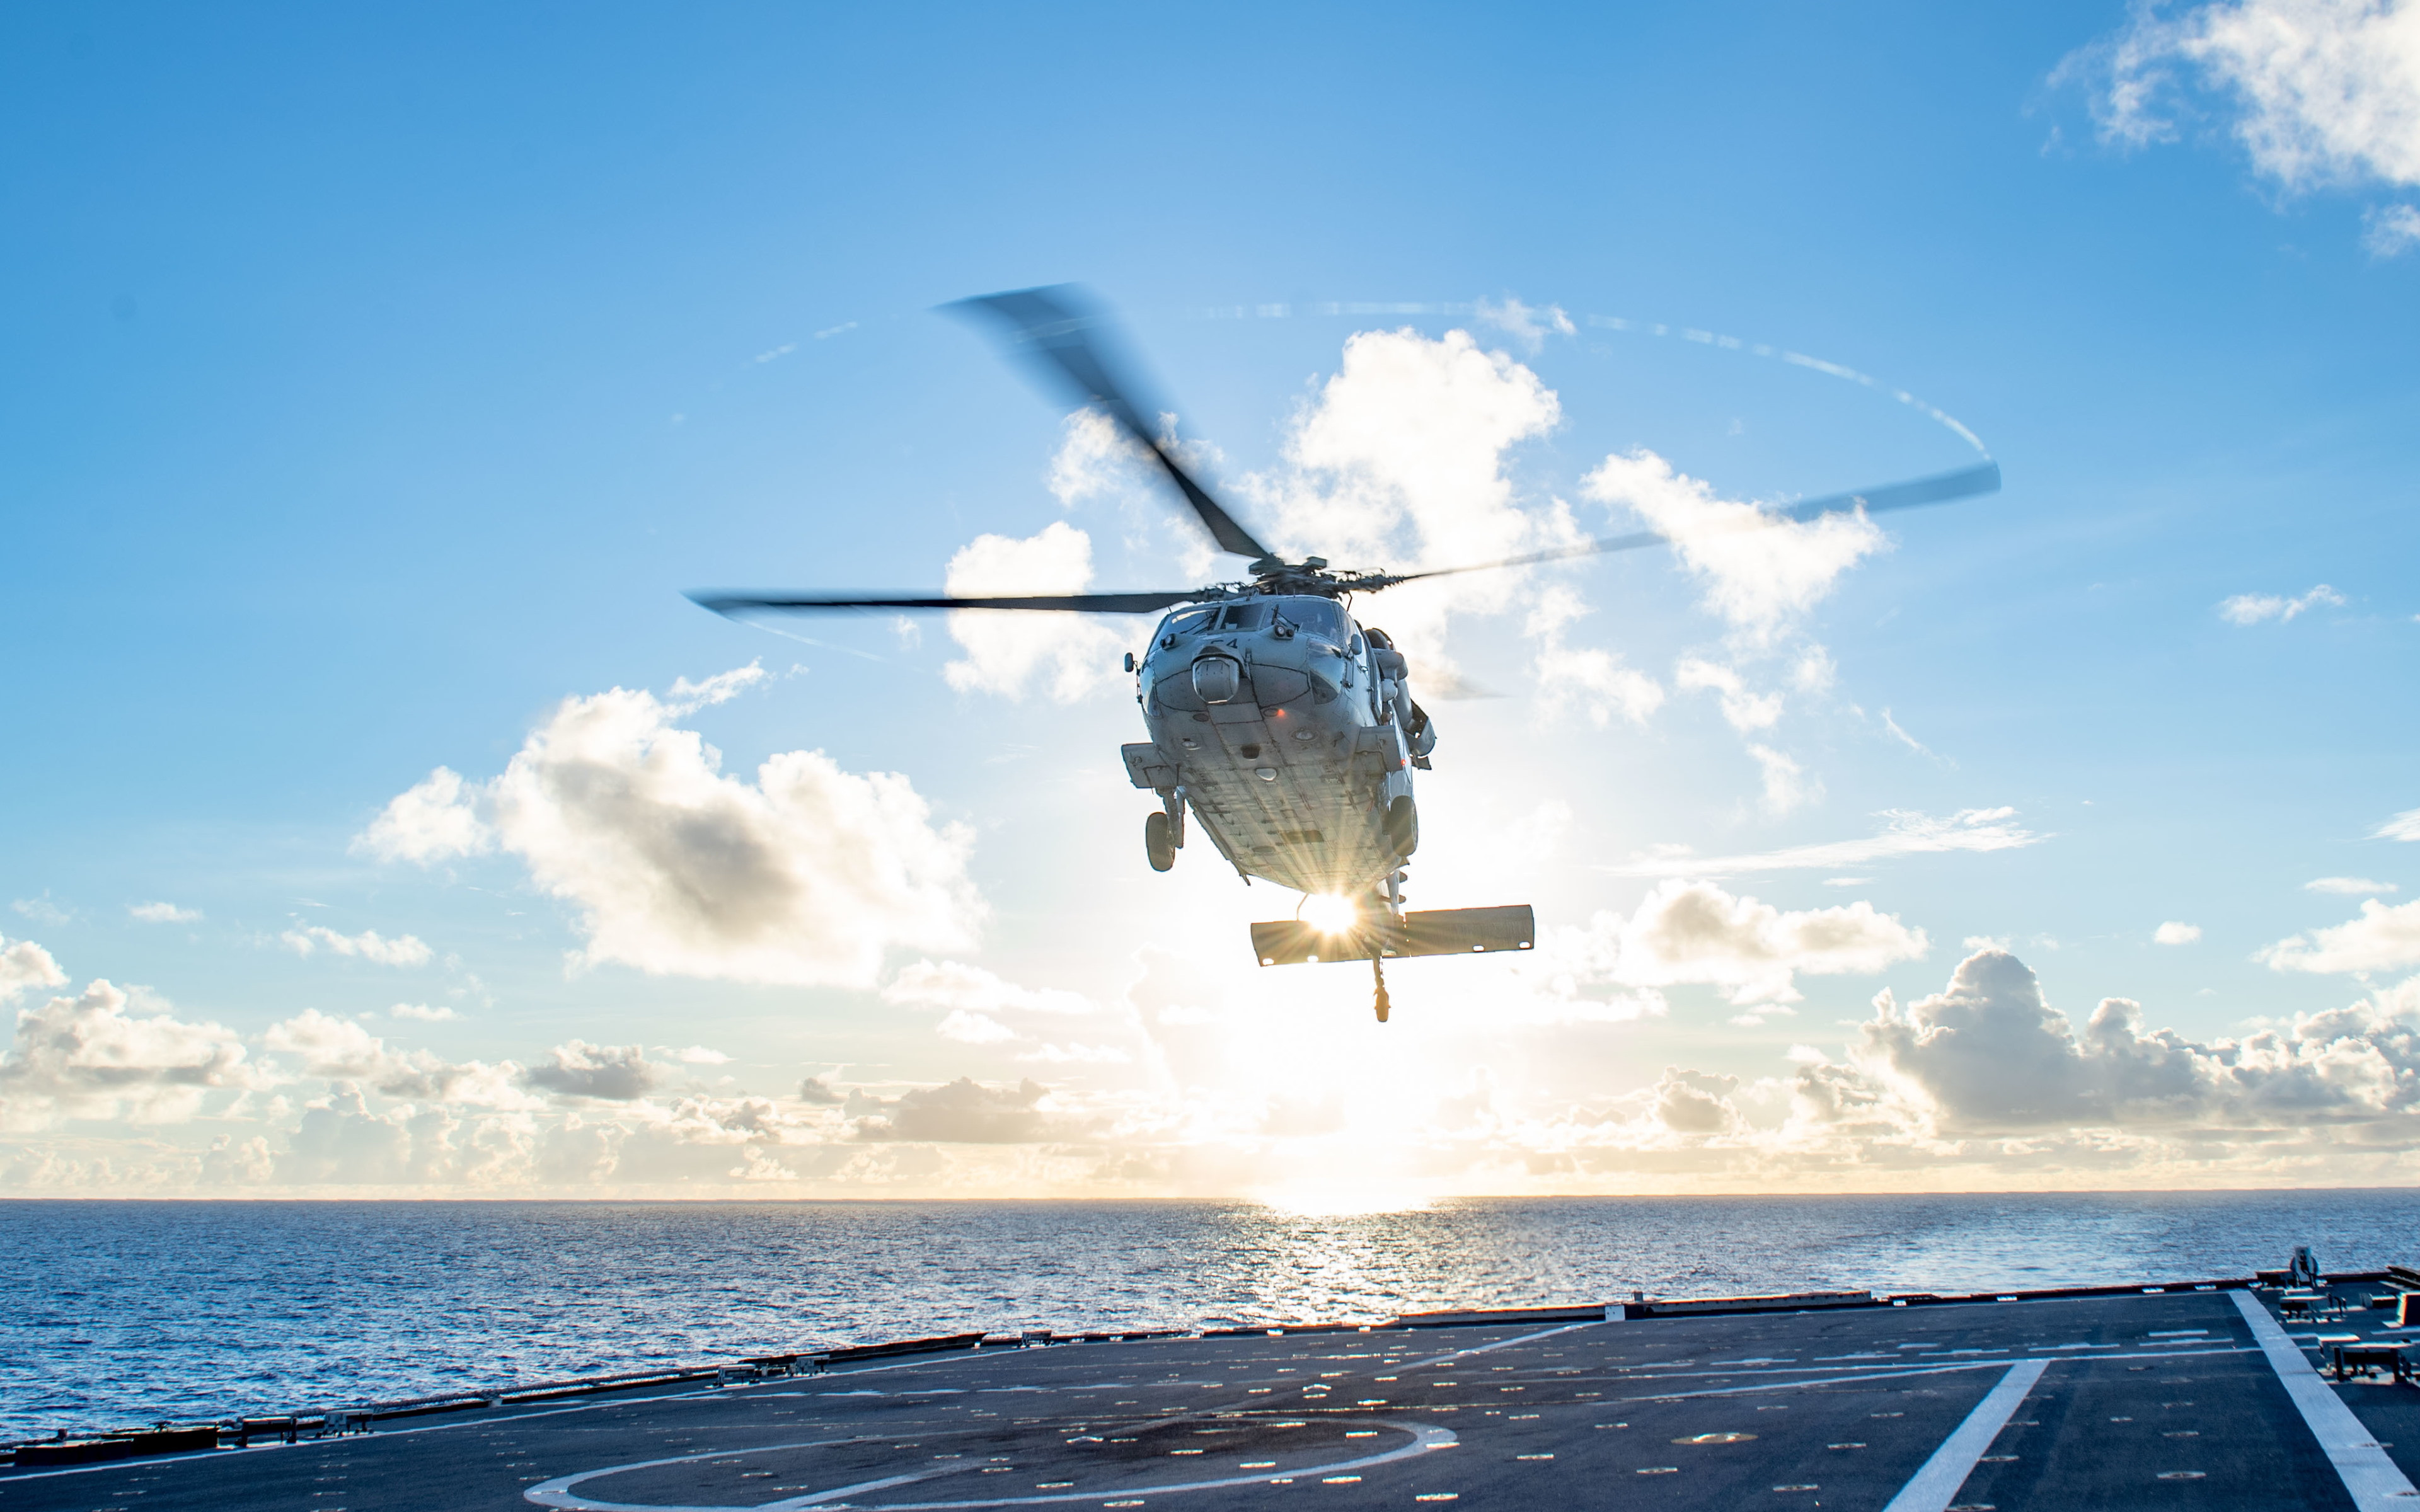 Seahawk Helicopter wallpaper 3840x2400